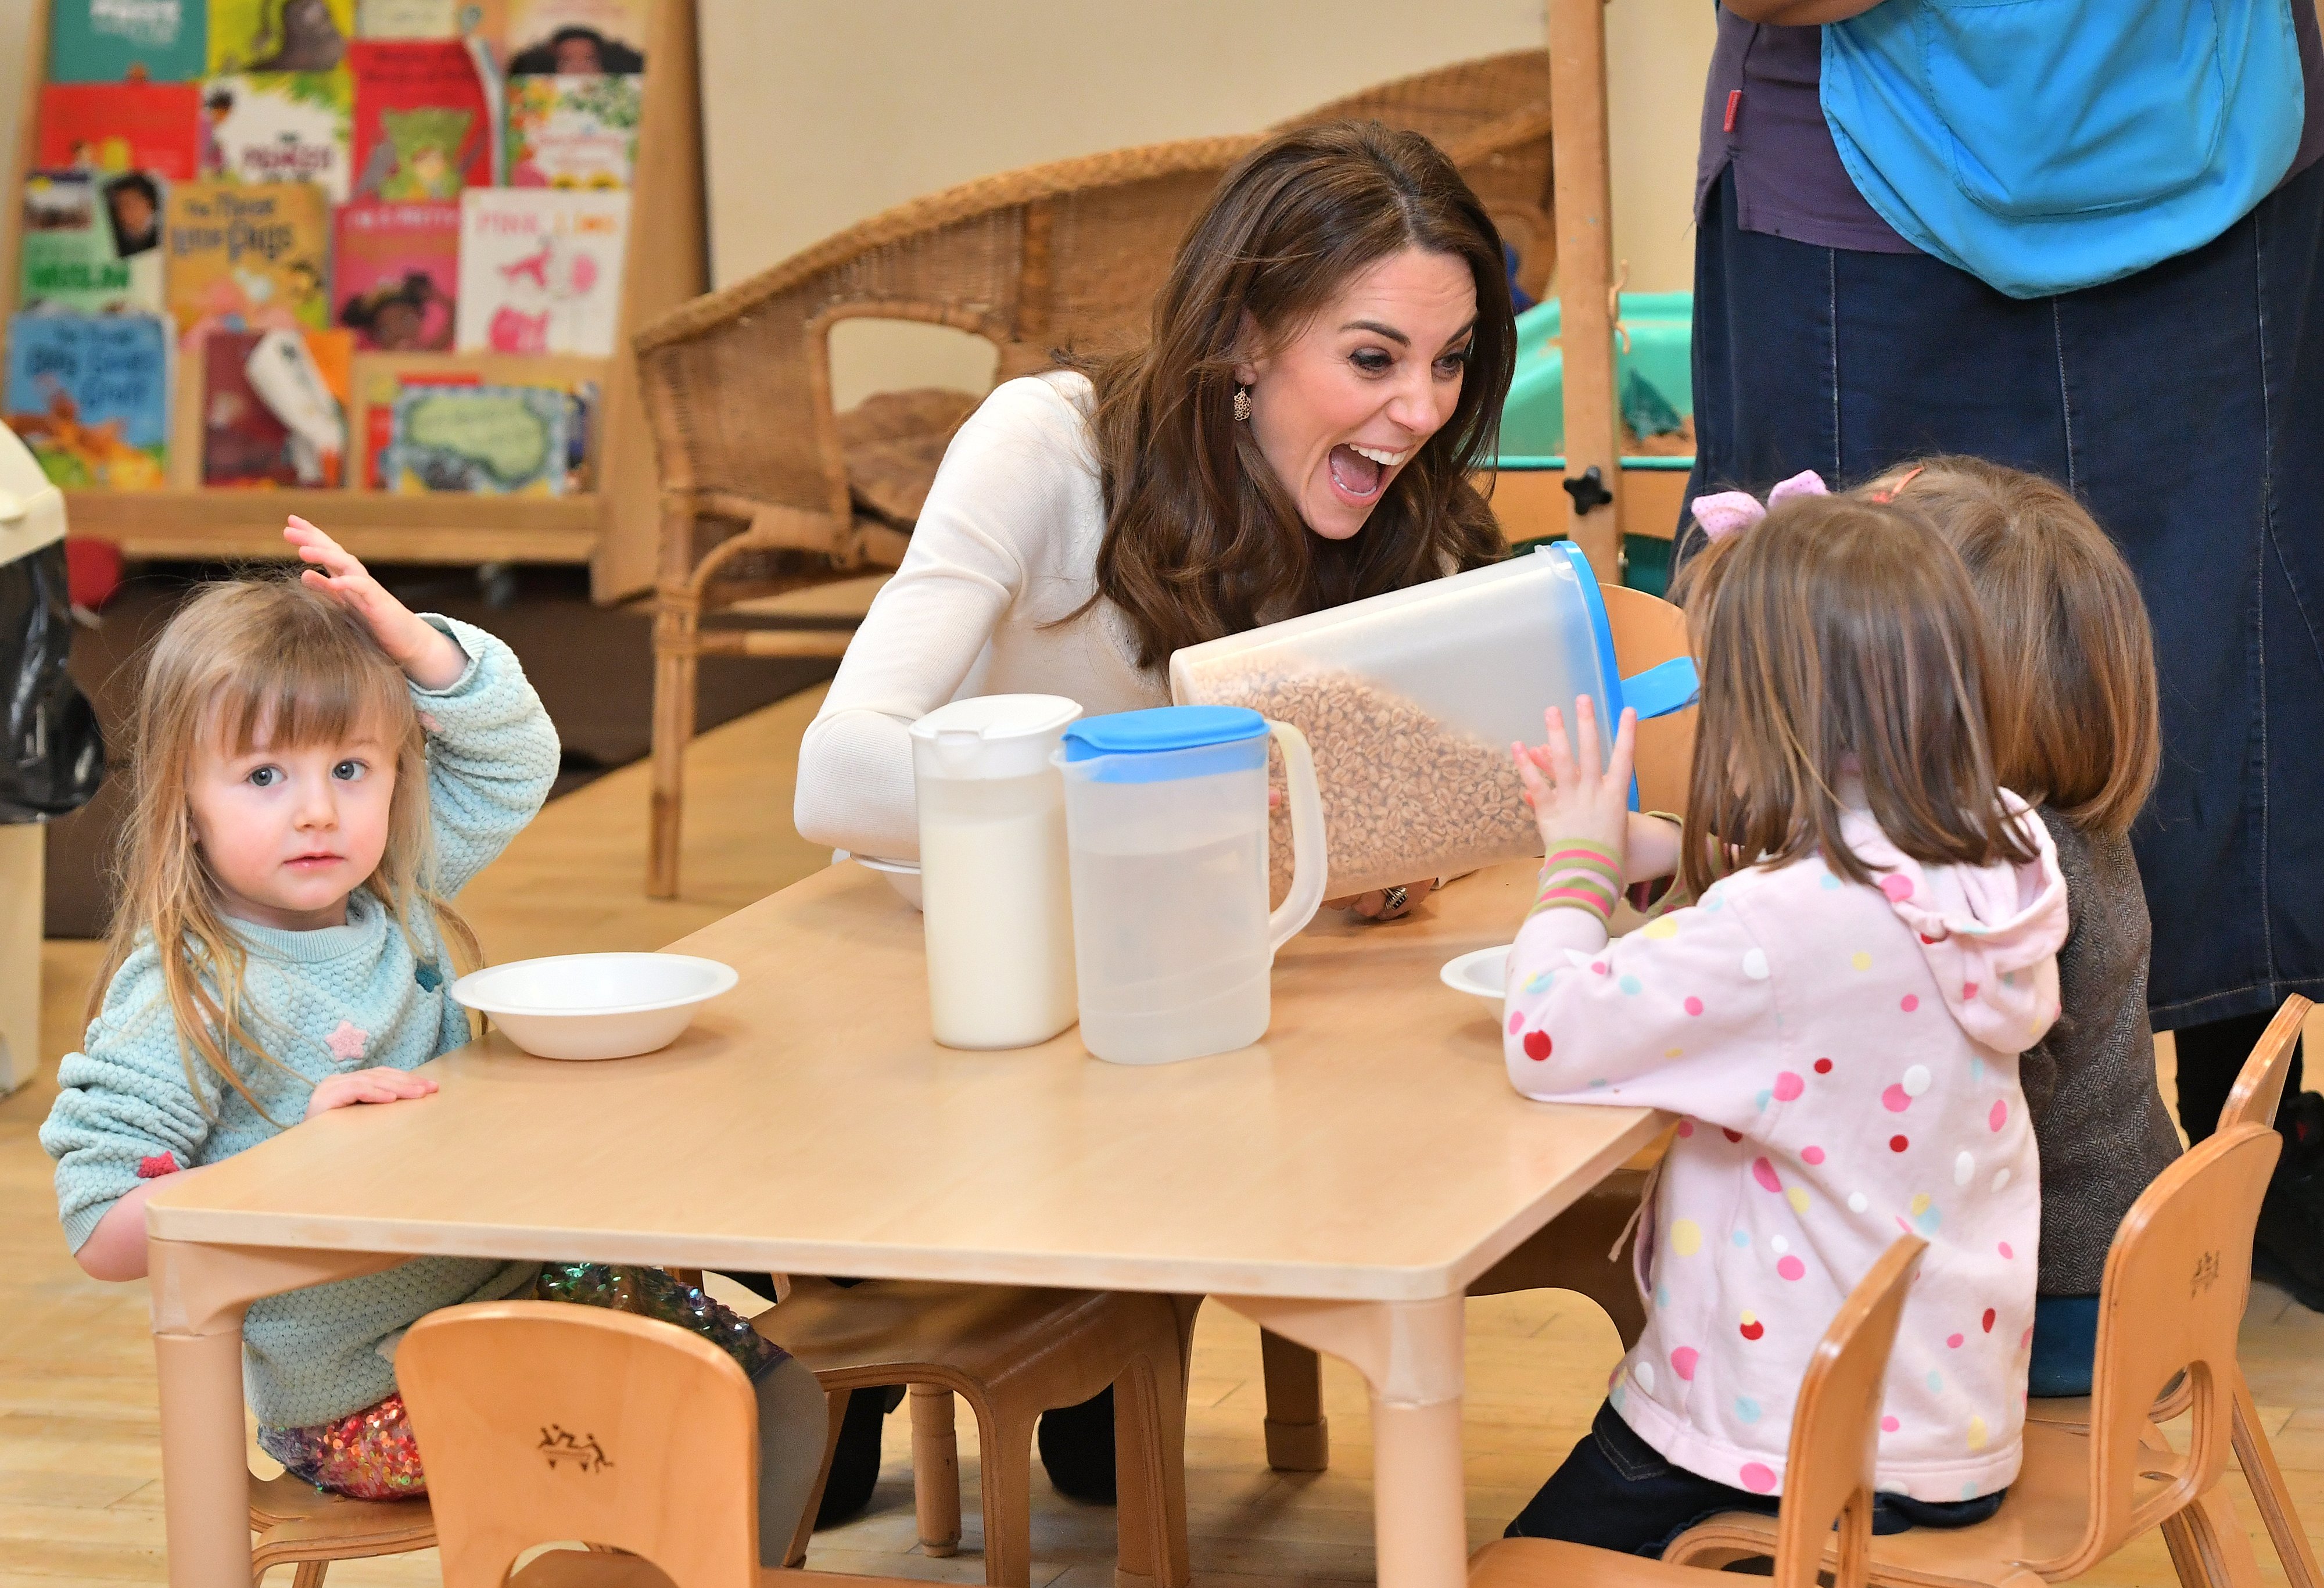 Kate, Duchess of Cambridge visits LEYF Stockwell Gardens Nursery & Pre-School following last week's launch of the "5 Big Questions" survey on January 29, 2020 in London, England. | Source: Getty Images